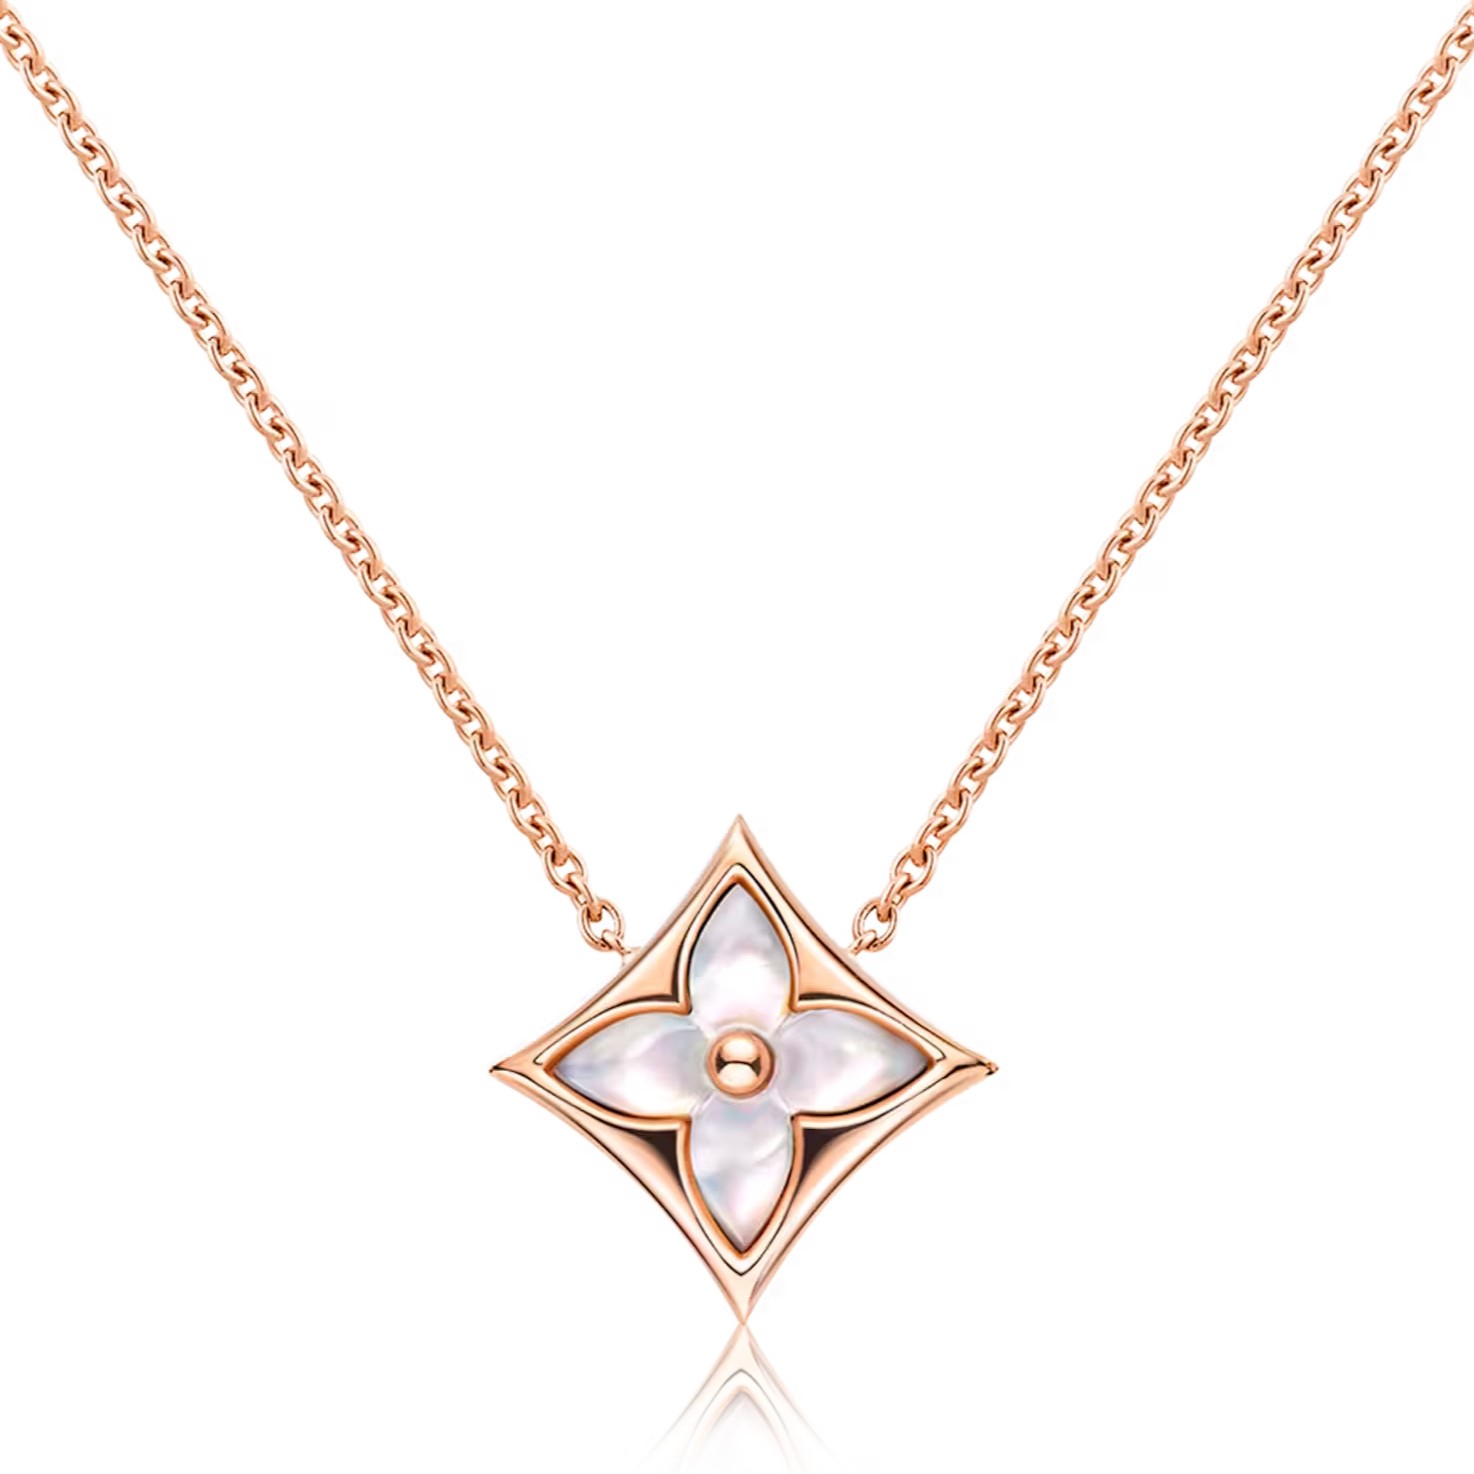 DÂY CHUYỀN LV LOUIS VUITTON COLOR BLOSSOM STAR PENDANT PINK GOLD AND WHITE MOTHER-OF-PEARL Q93521 1